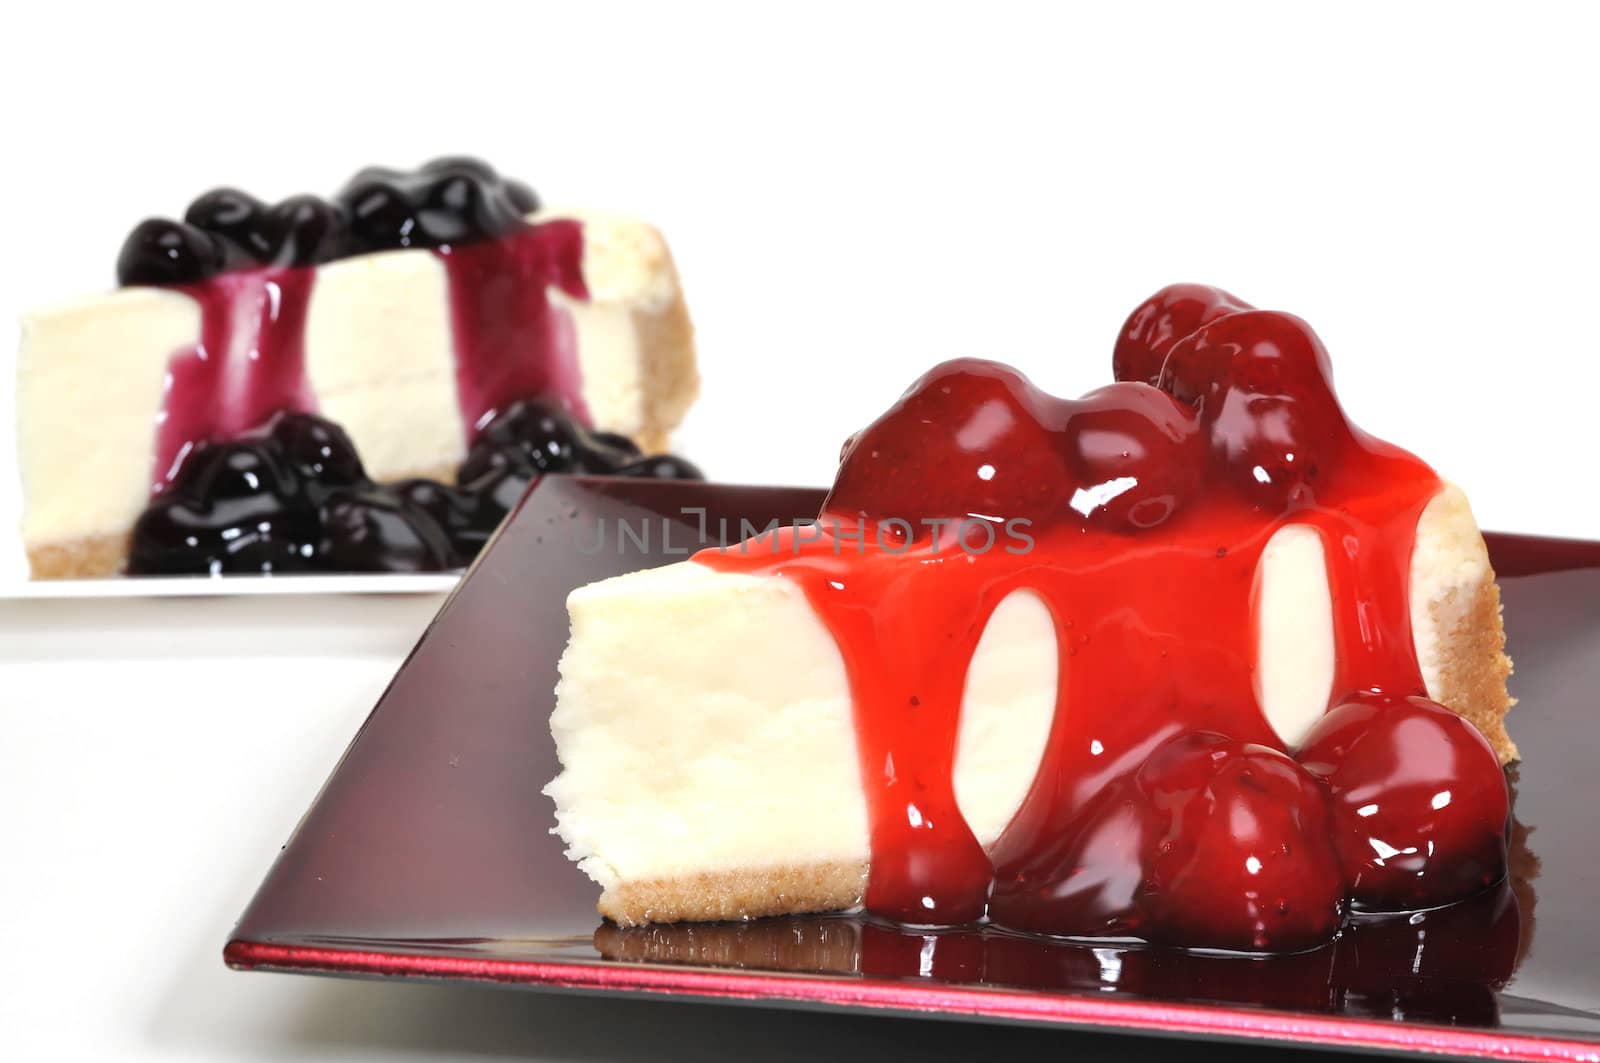 Strawberry and blueberry cheesecake slices isolated on white background.